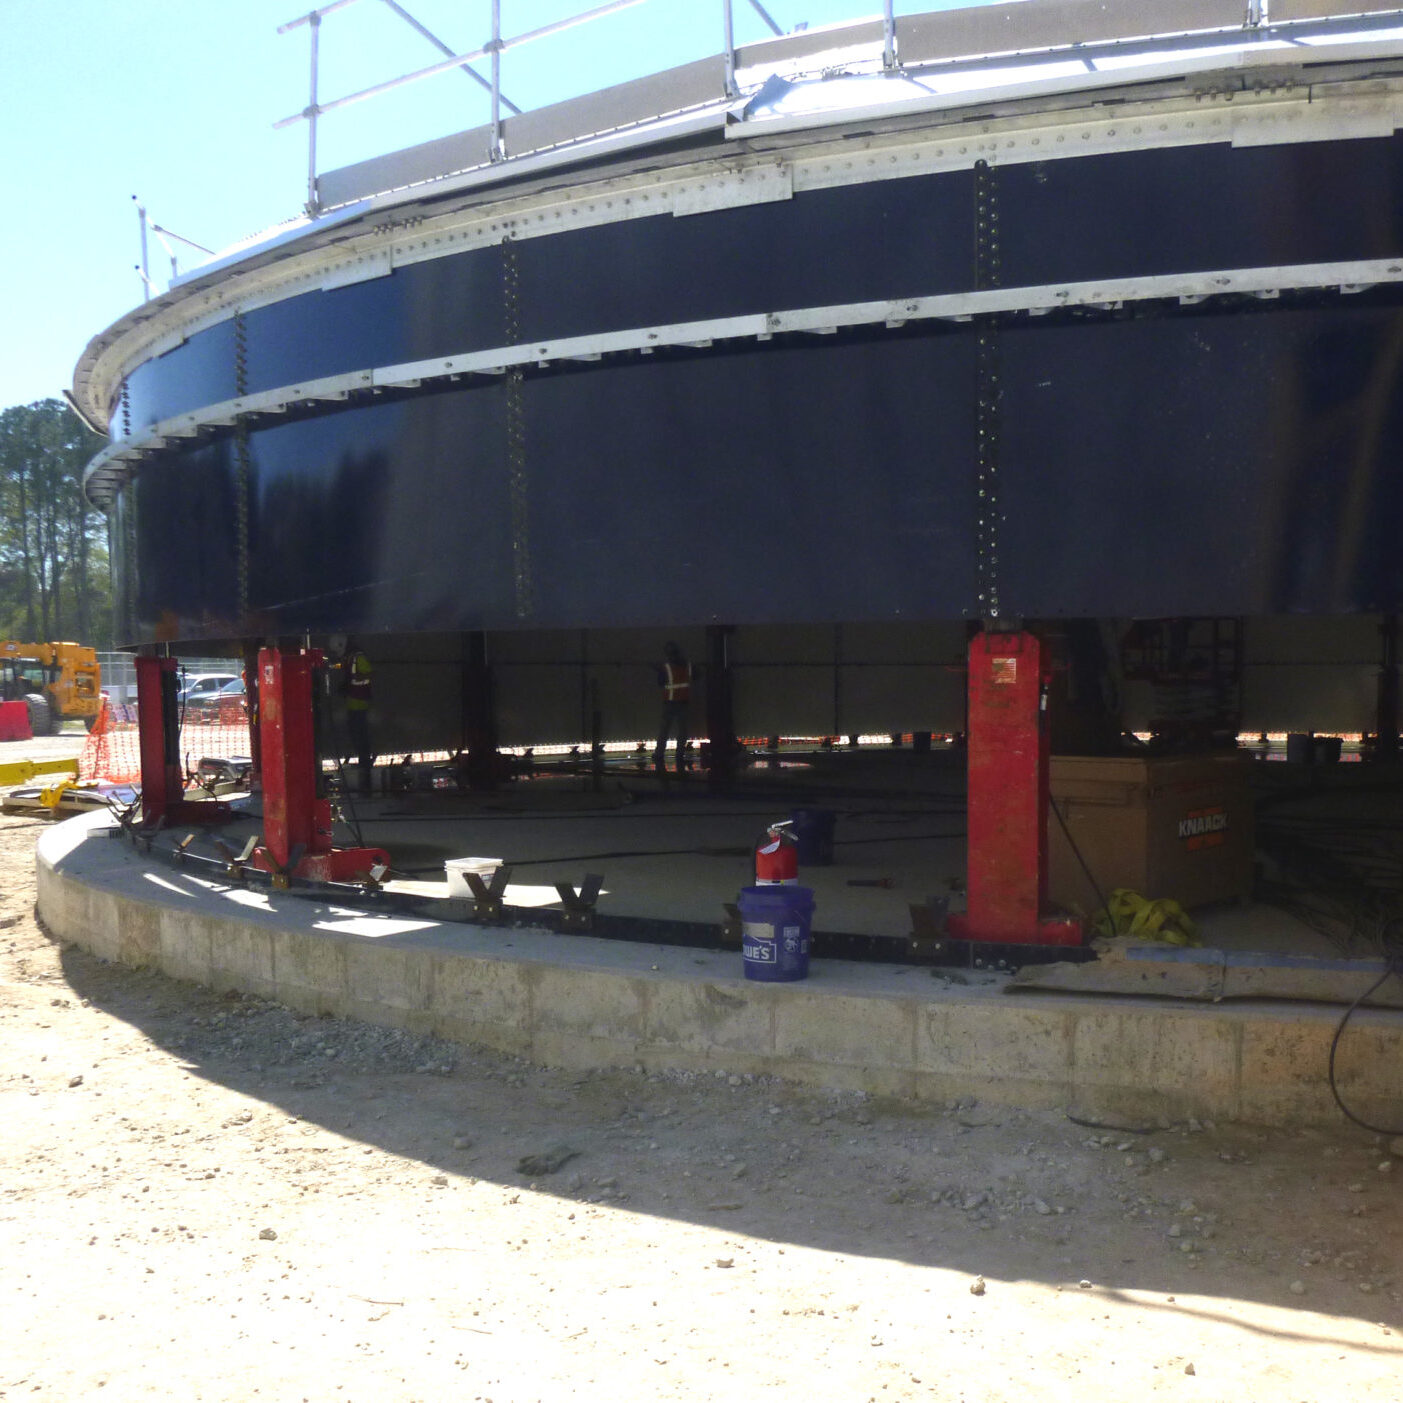 Red hydraulic jacks lifting steel water tank panels at a jobsite.